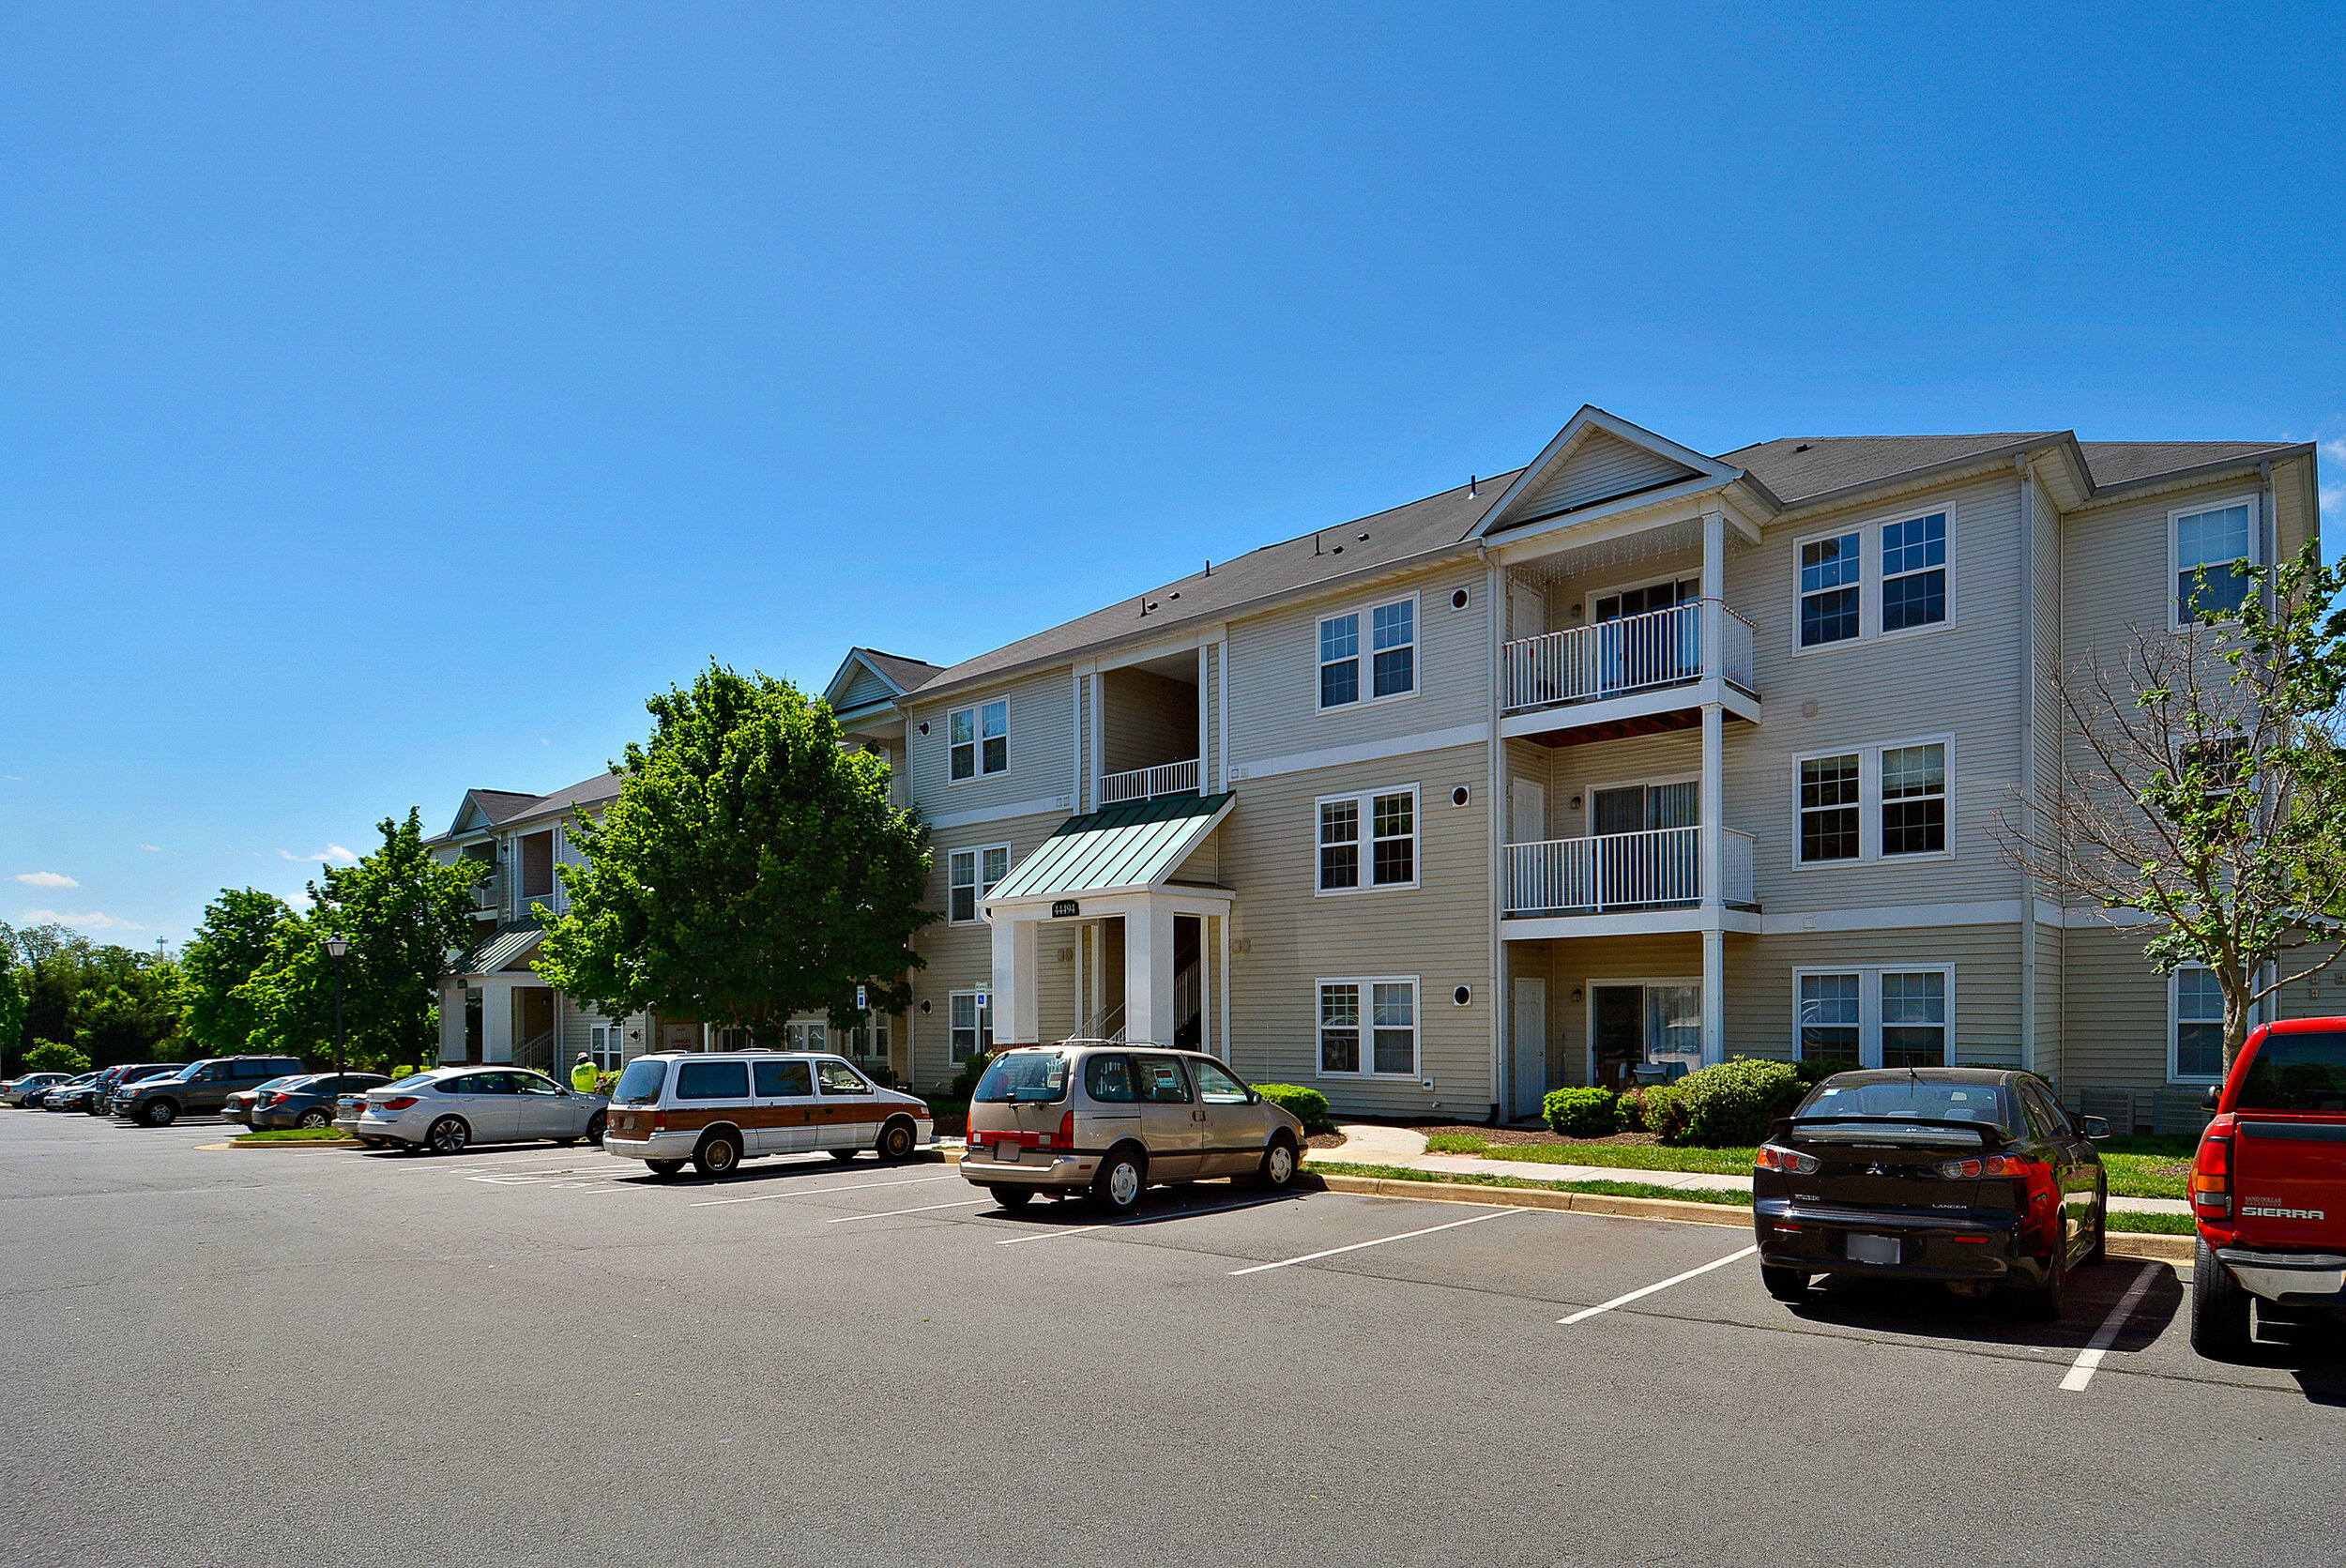  We offer 2- and 3- bedroom apartments in Ashburn, VA 